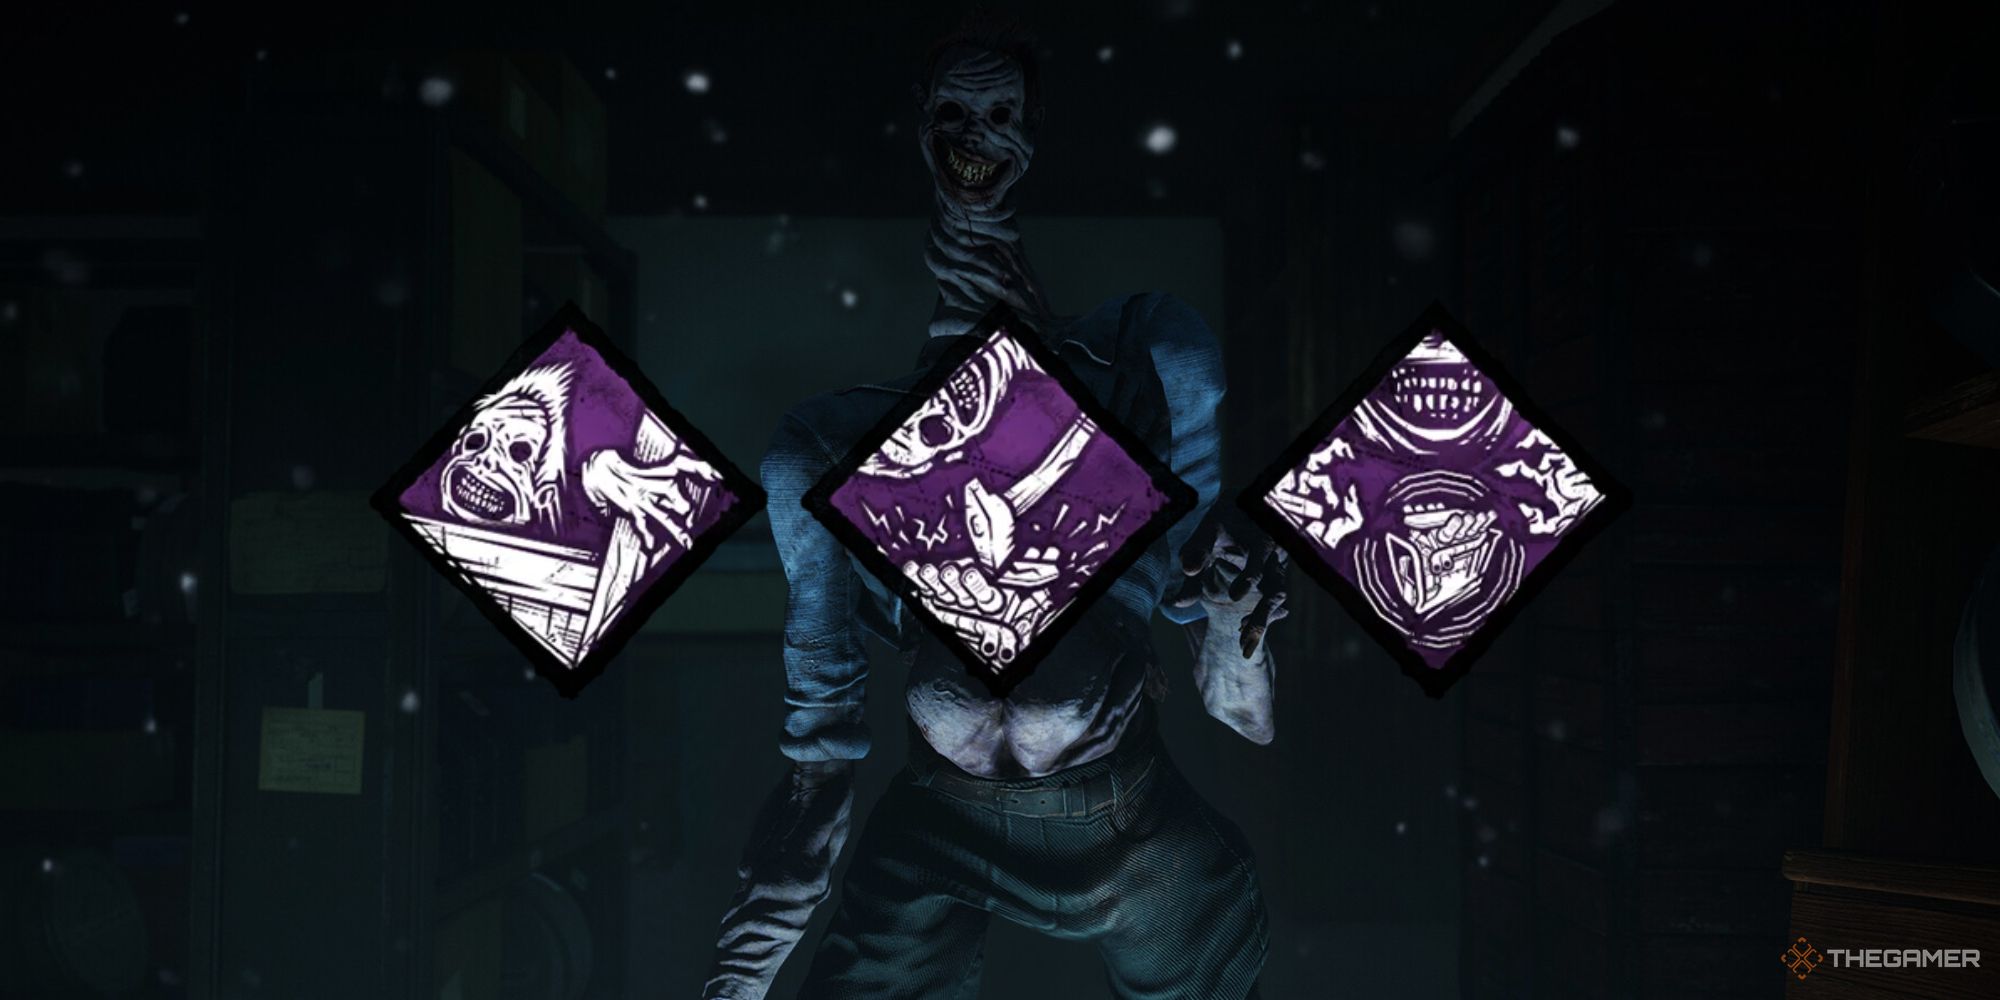 The three Unique Perk icons for the Unknown Killer.